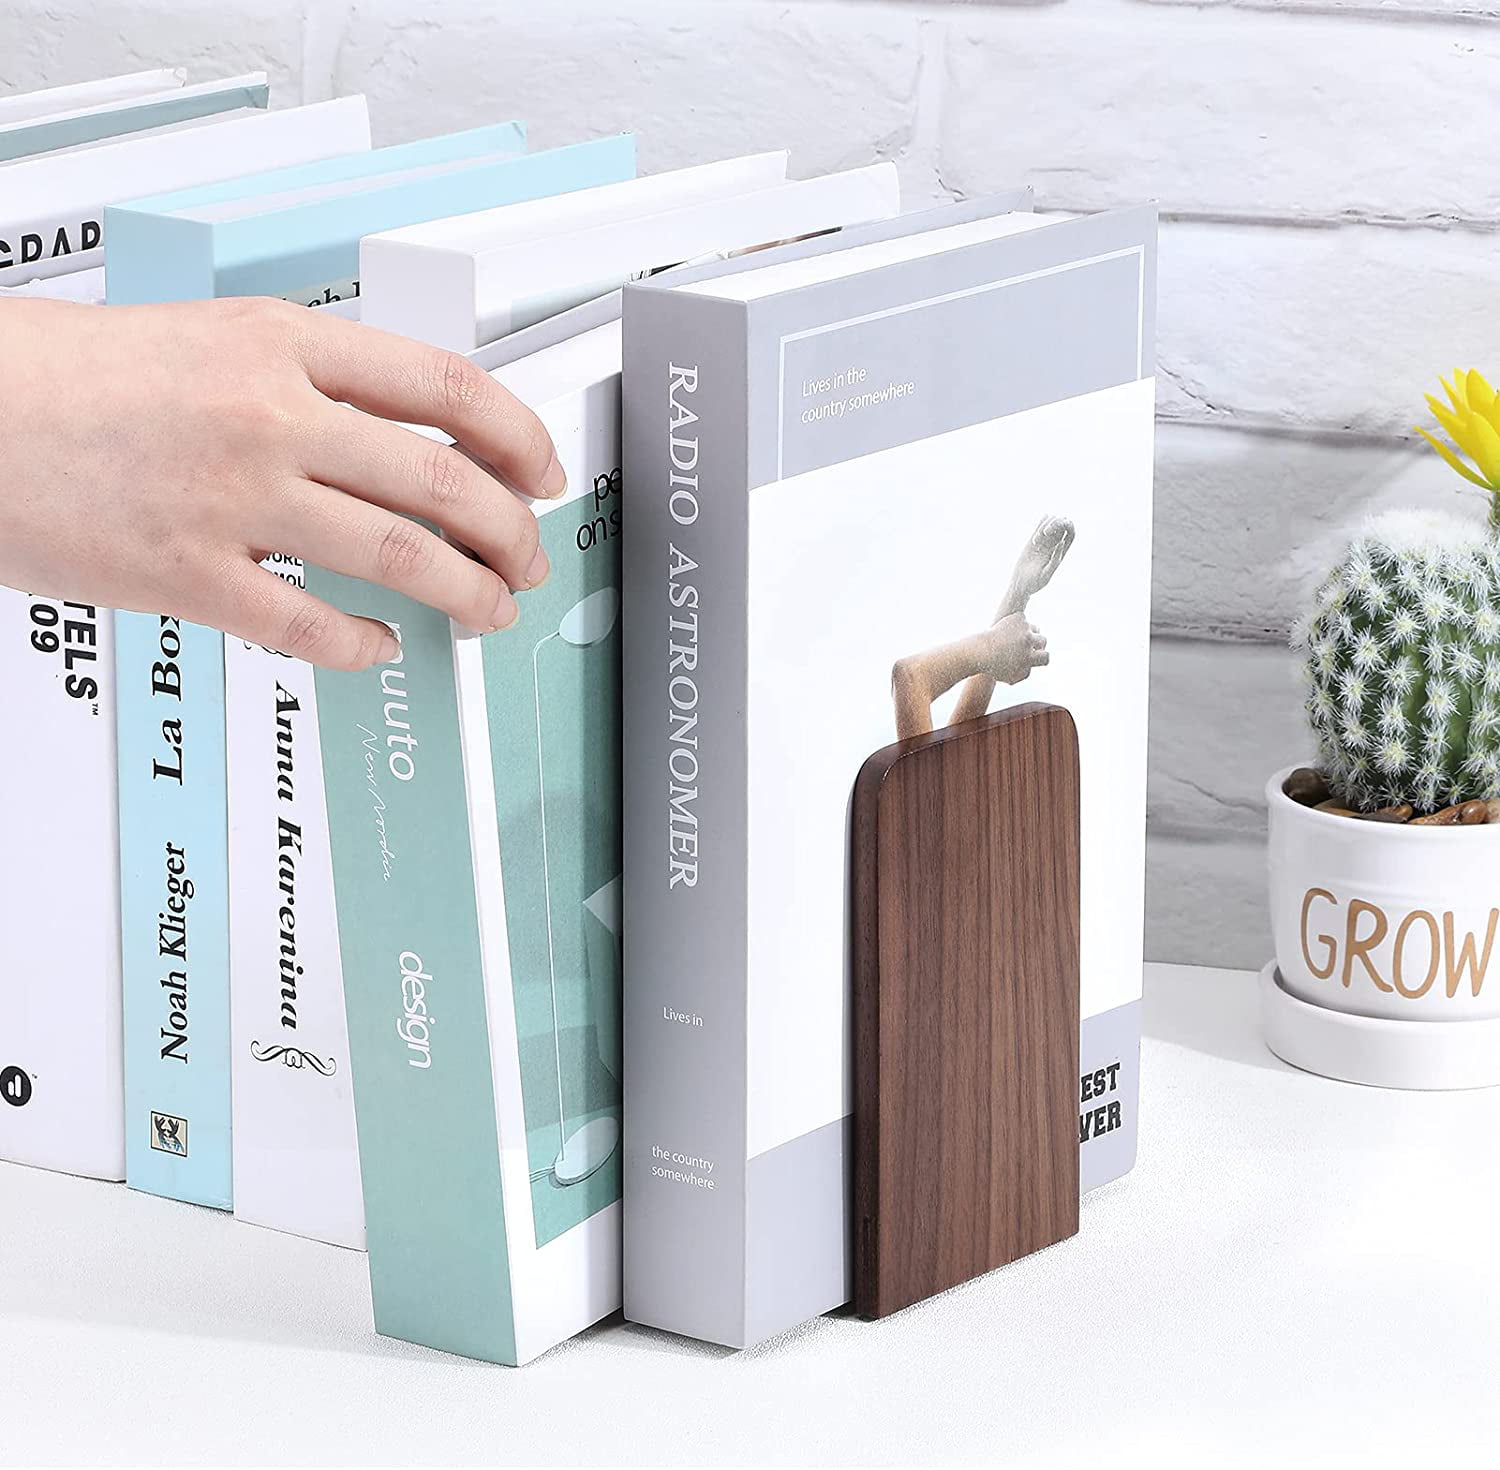 Nicunom 2 Pairs/4 Pieces Wood Bookends CD's Non Skid Black Walnut Book Stand for Home Office School DVD's L-Shaped Book Ends Perfect for Books Video Games 